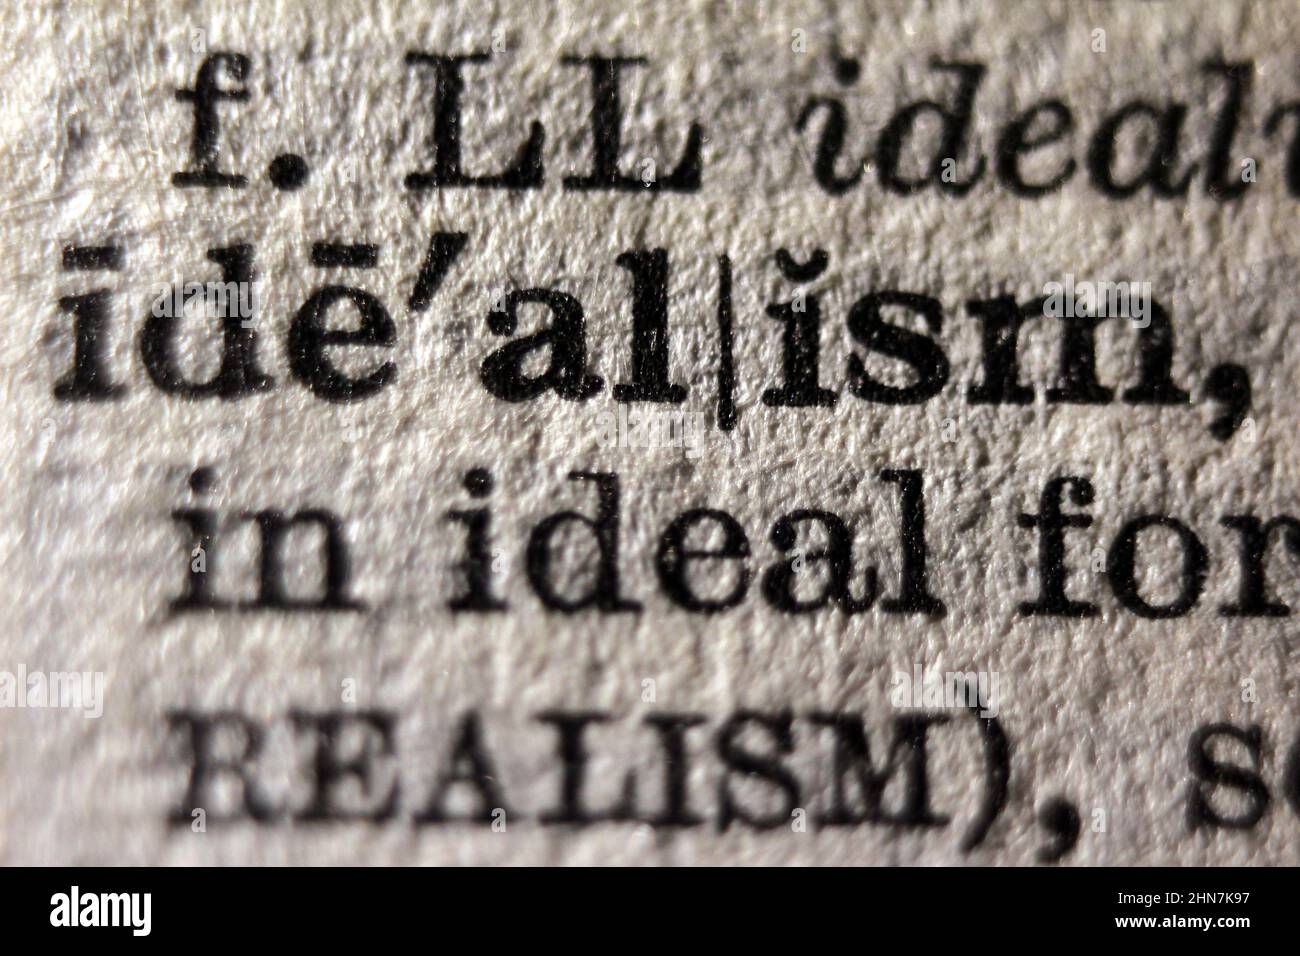 Definition of word idealism on dictionary page, close-up Stock Photo